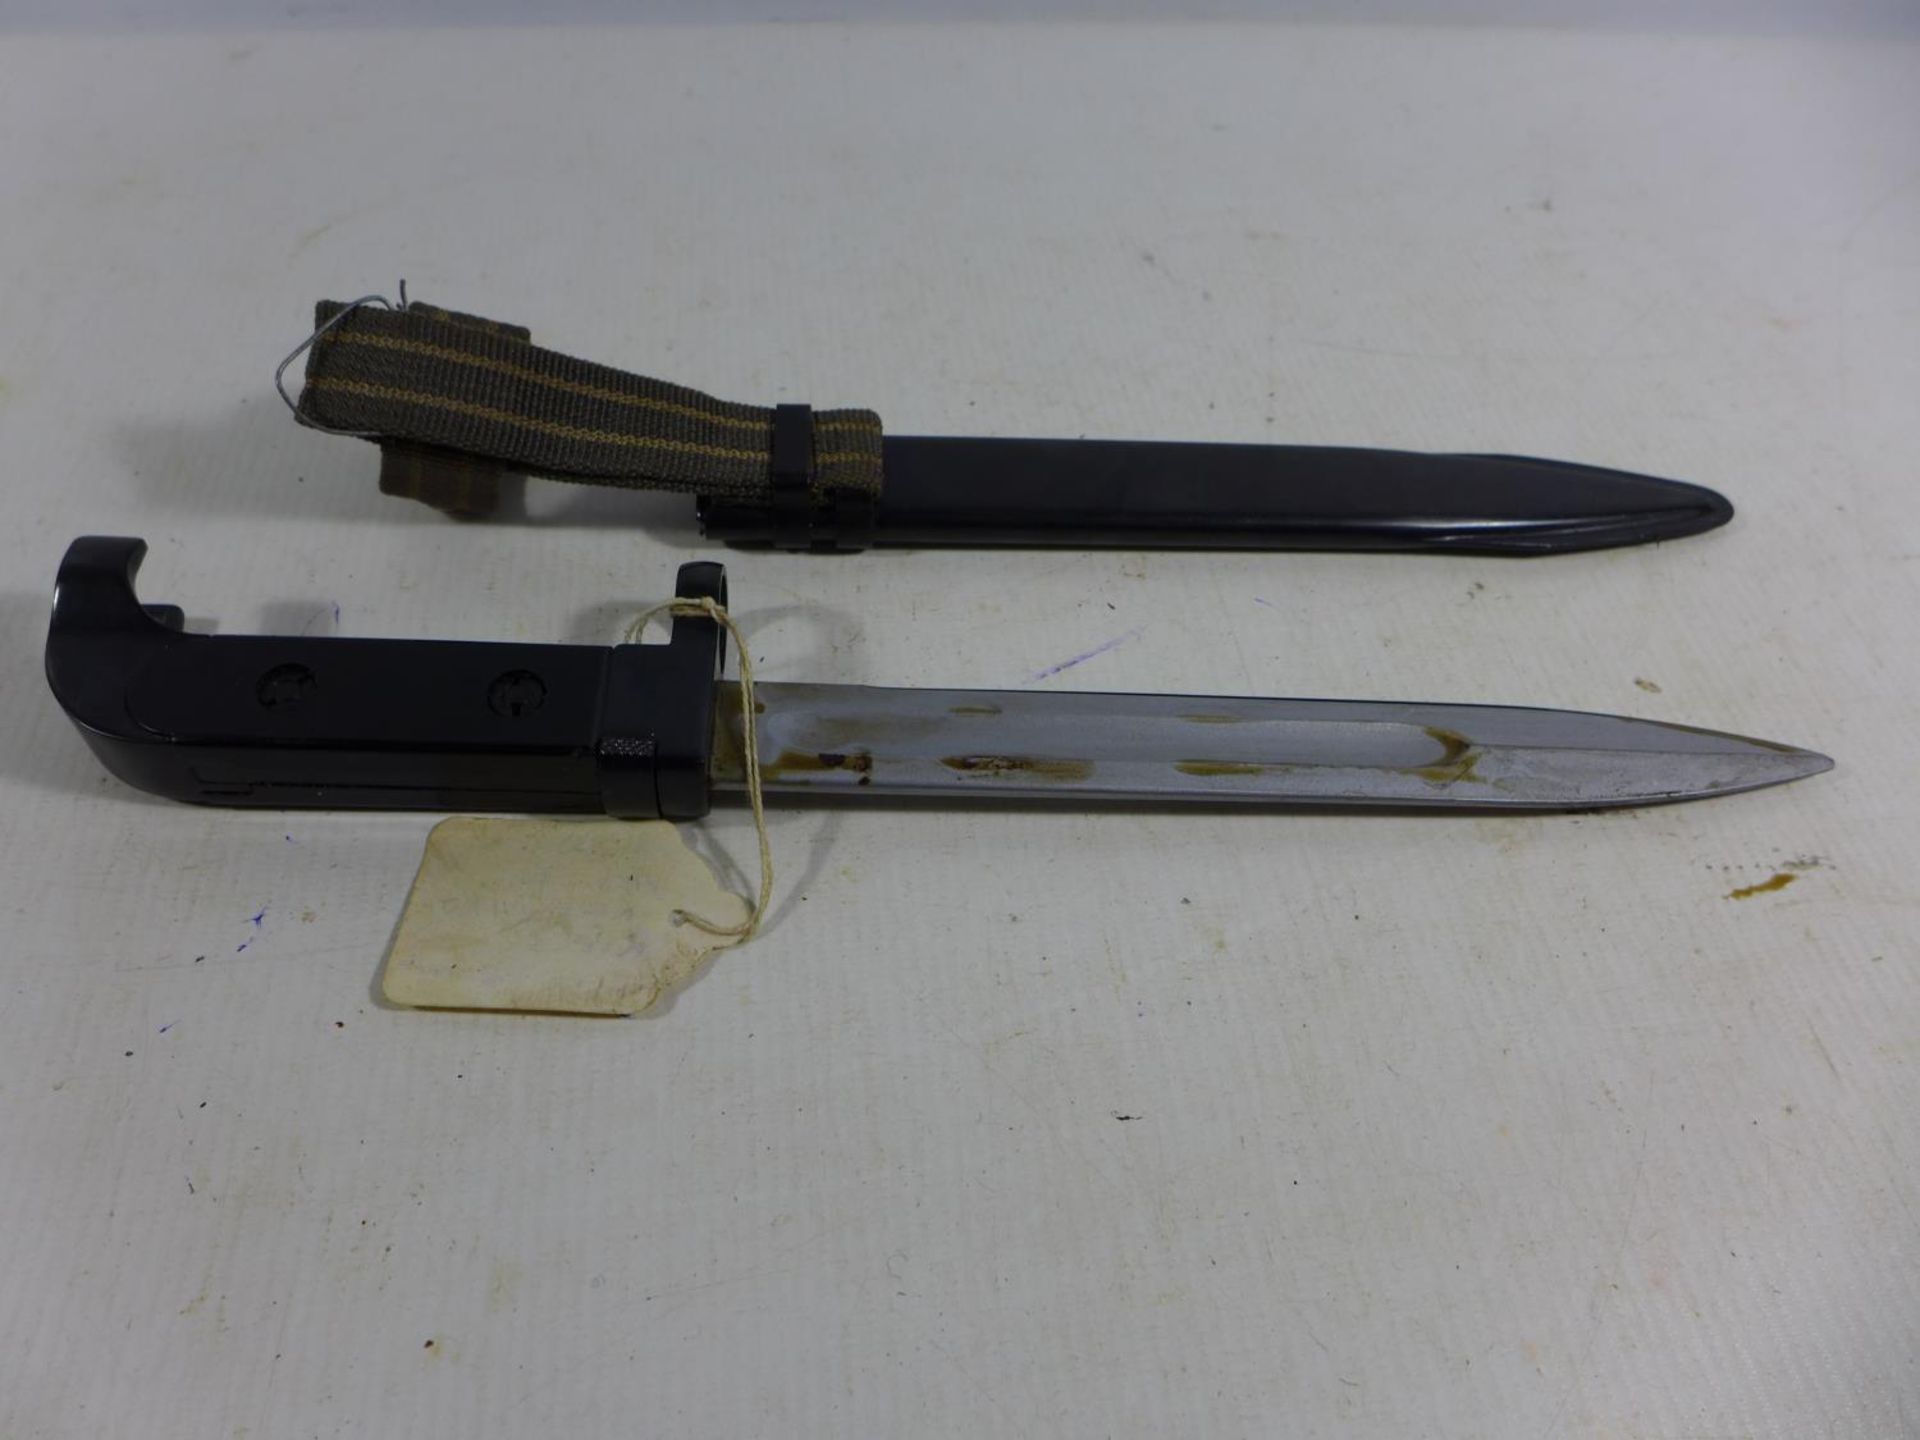 A RUSSIAN/EAST GERMAN AK47 BAYONET AND SCABBARD, 20CM BLADE, LENGTH 33CM - Image 2 of 3